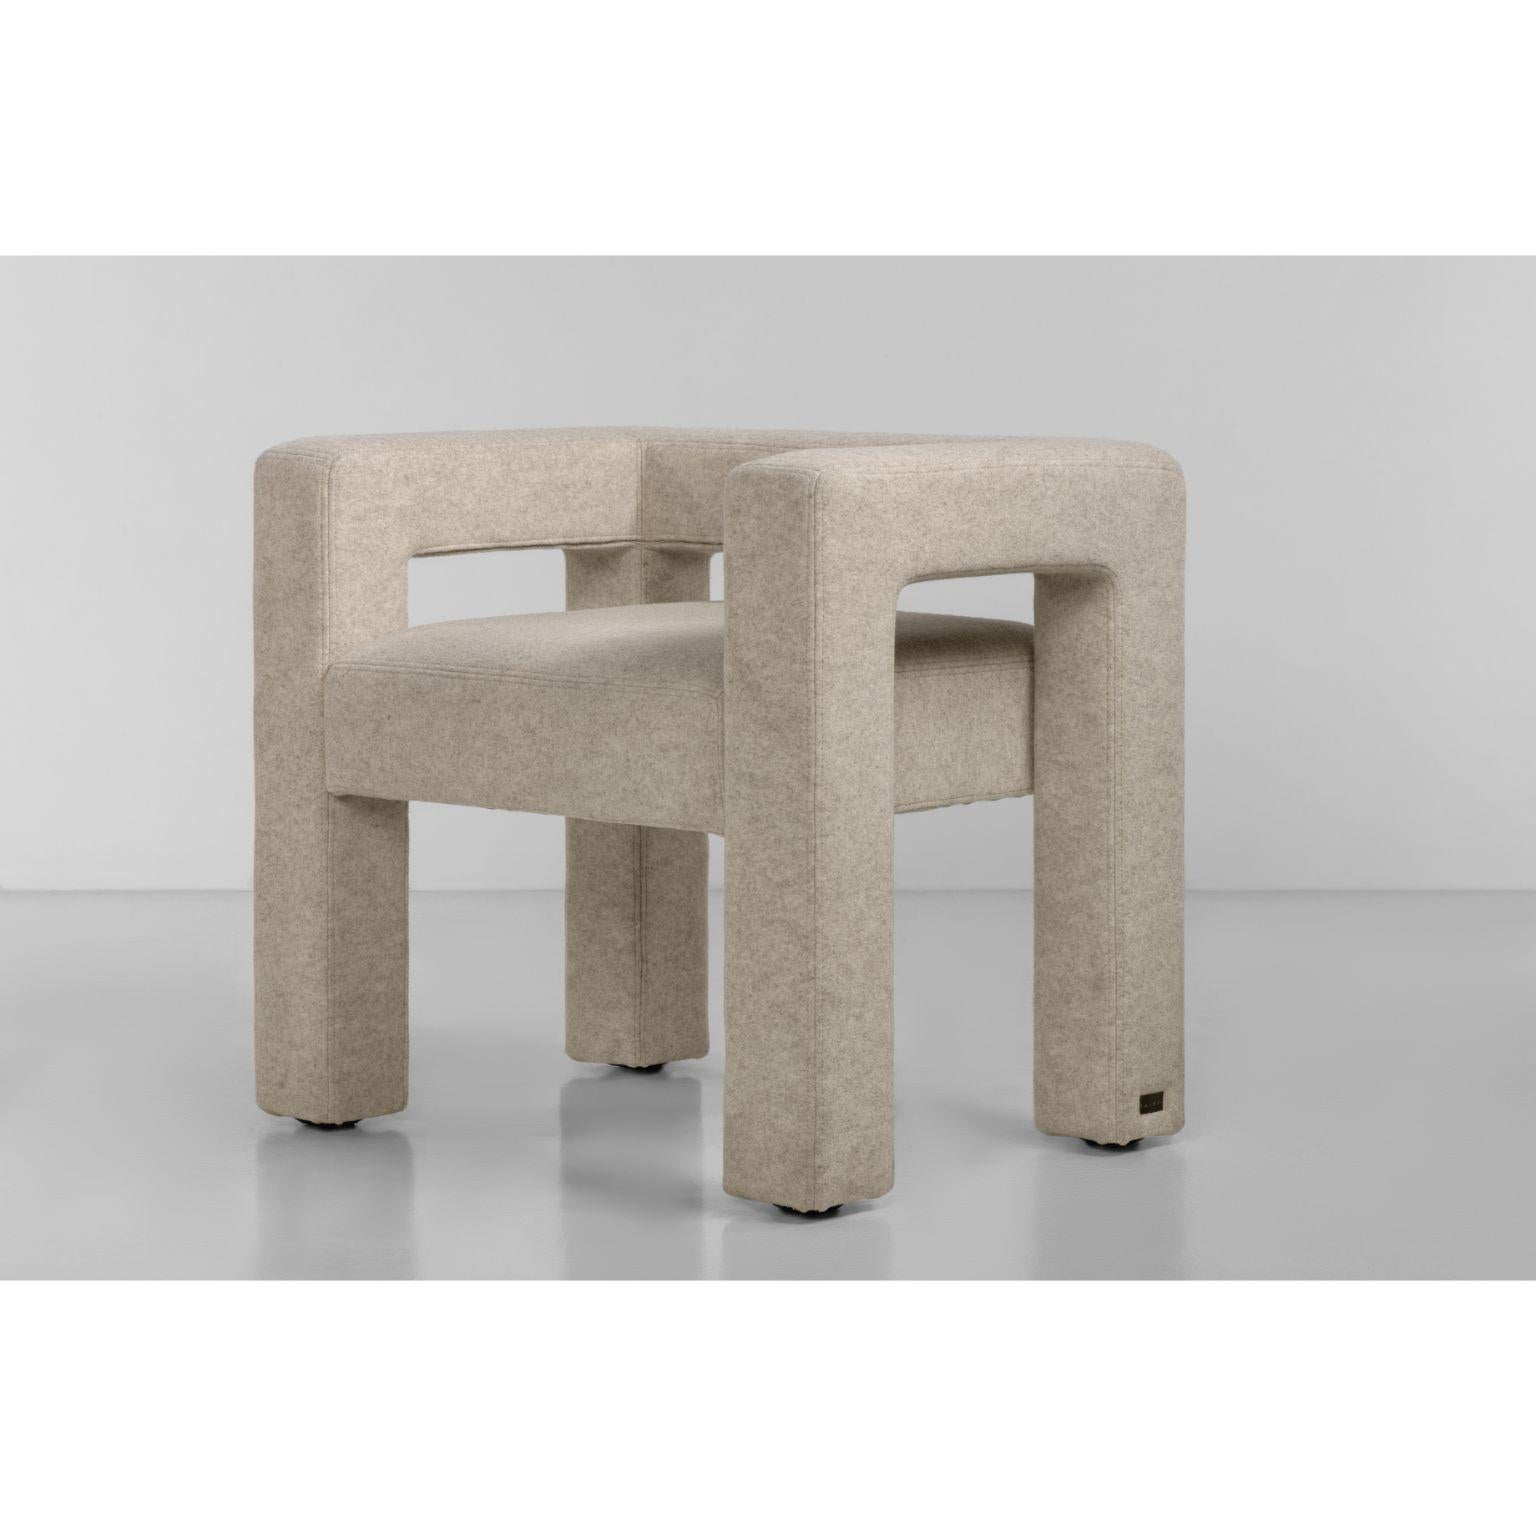 Contemporary armchair by Faina
Design: Victoriya Yakusha
Material: textiles, foamrubber, sintepon, wood, plywood
Dimensions: 45 ? 76 ? 67 cm
Weight: 20 kg

In search of new-old design messages, Victoria Yakusha conducted a study of the daily